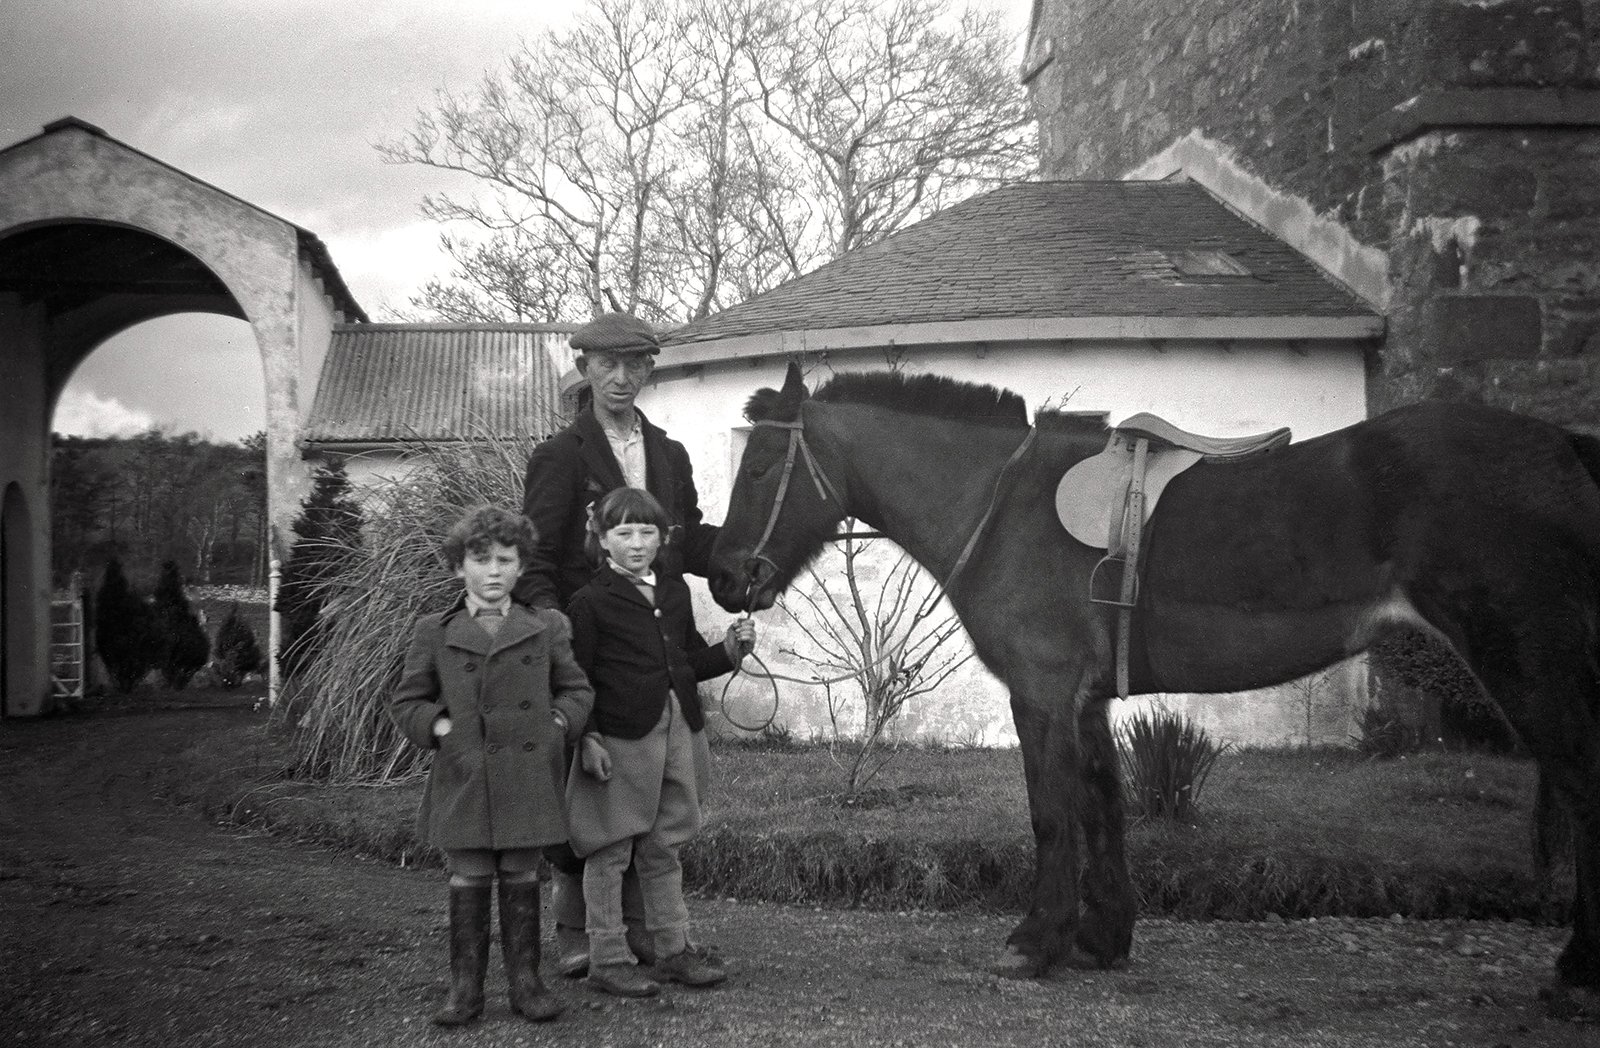 Left to right: Cormac O’Malley, Pat Clark and Etain O’Malley at Burrishoole, County Mayo, 1947. Photograph by Helen Hooker O’Malley.